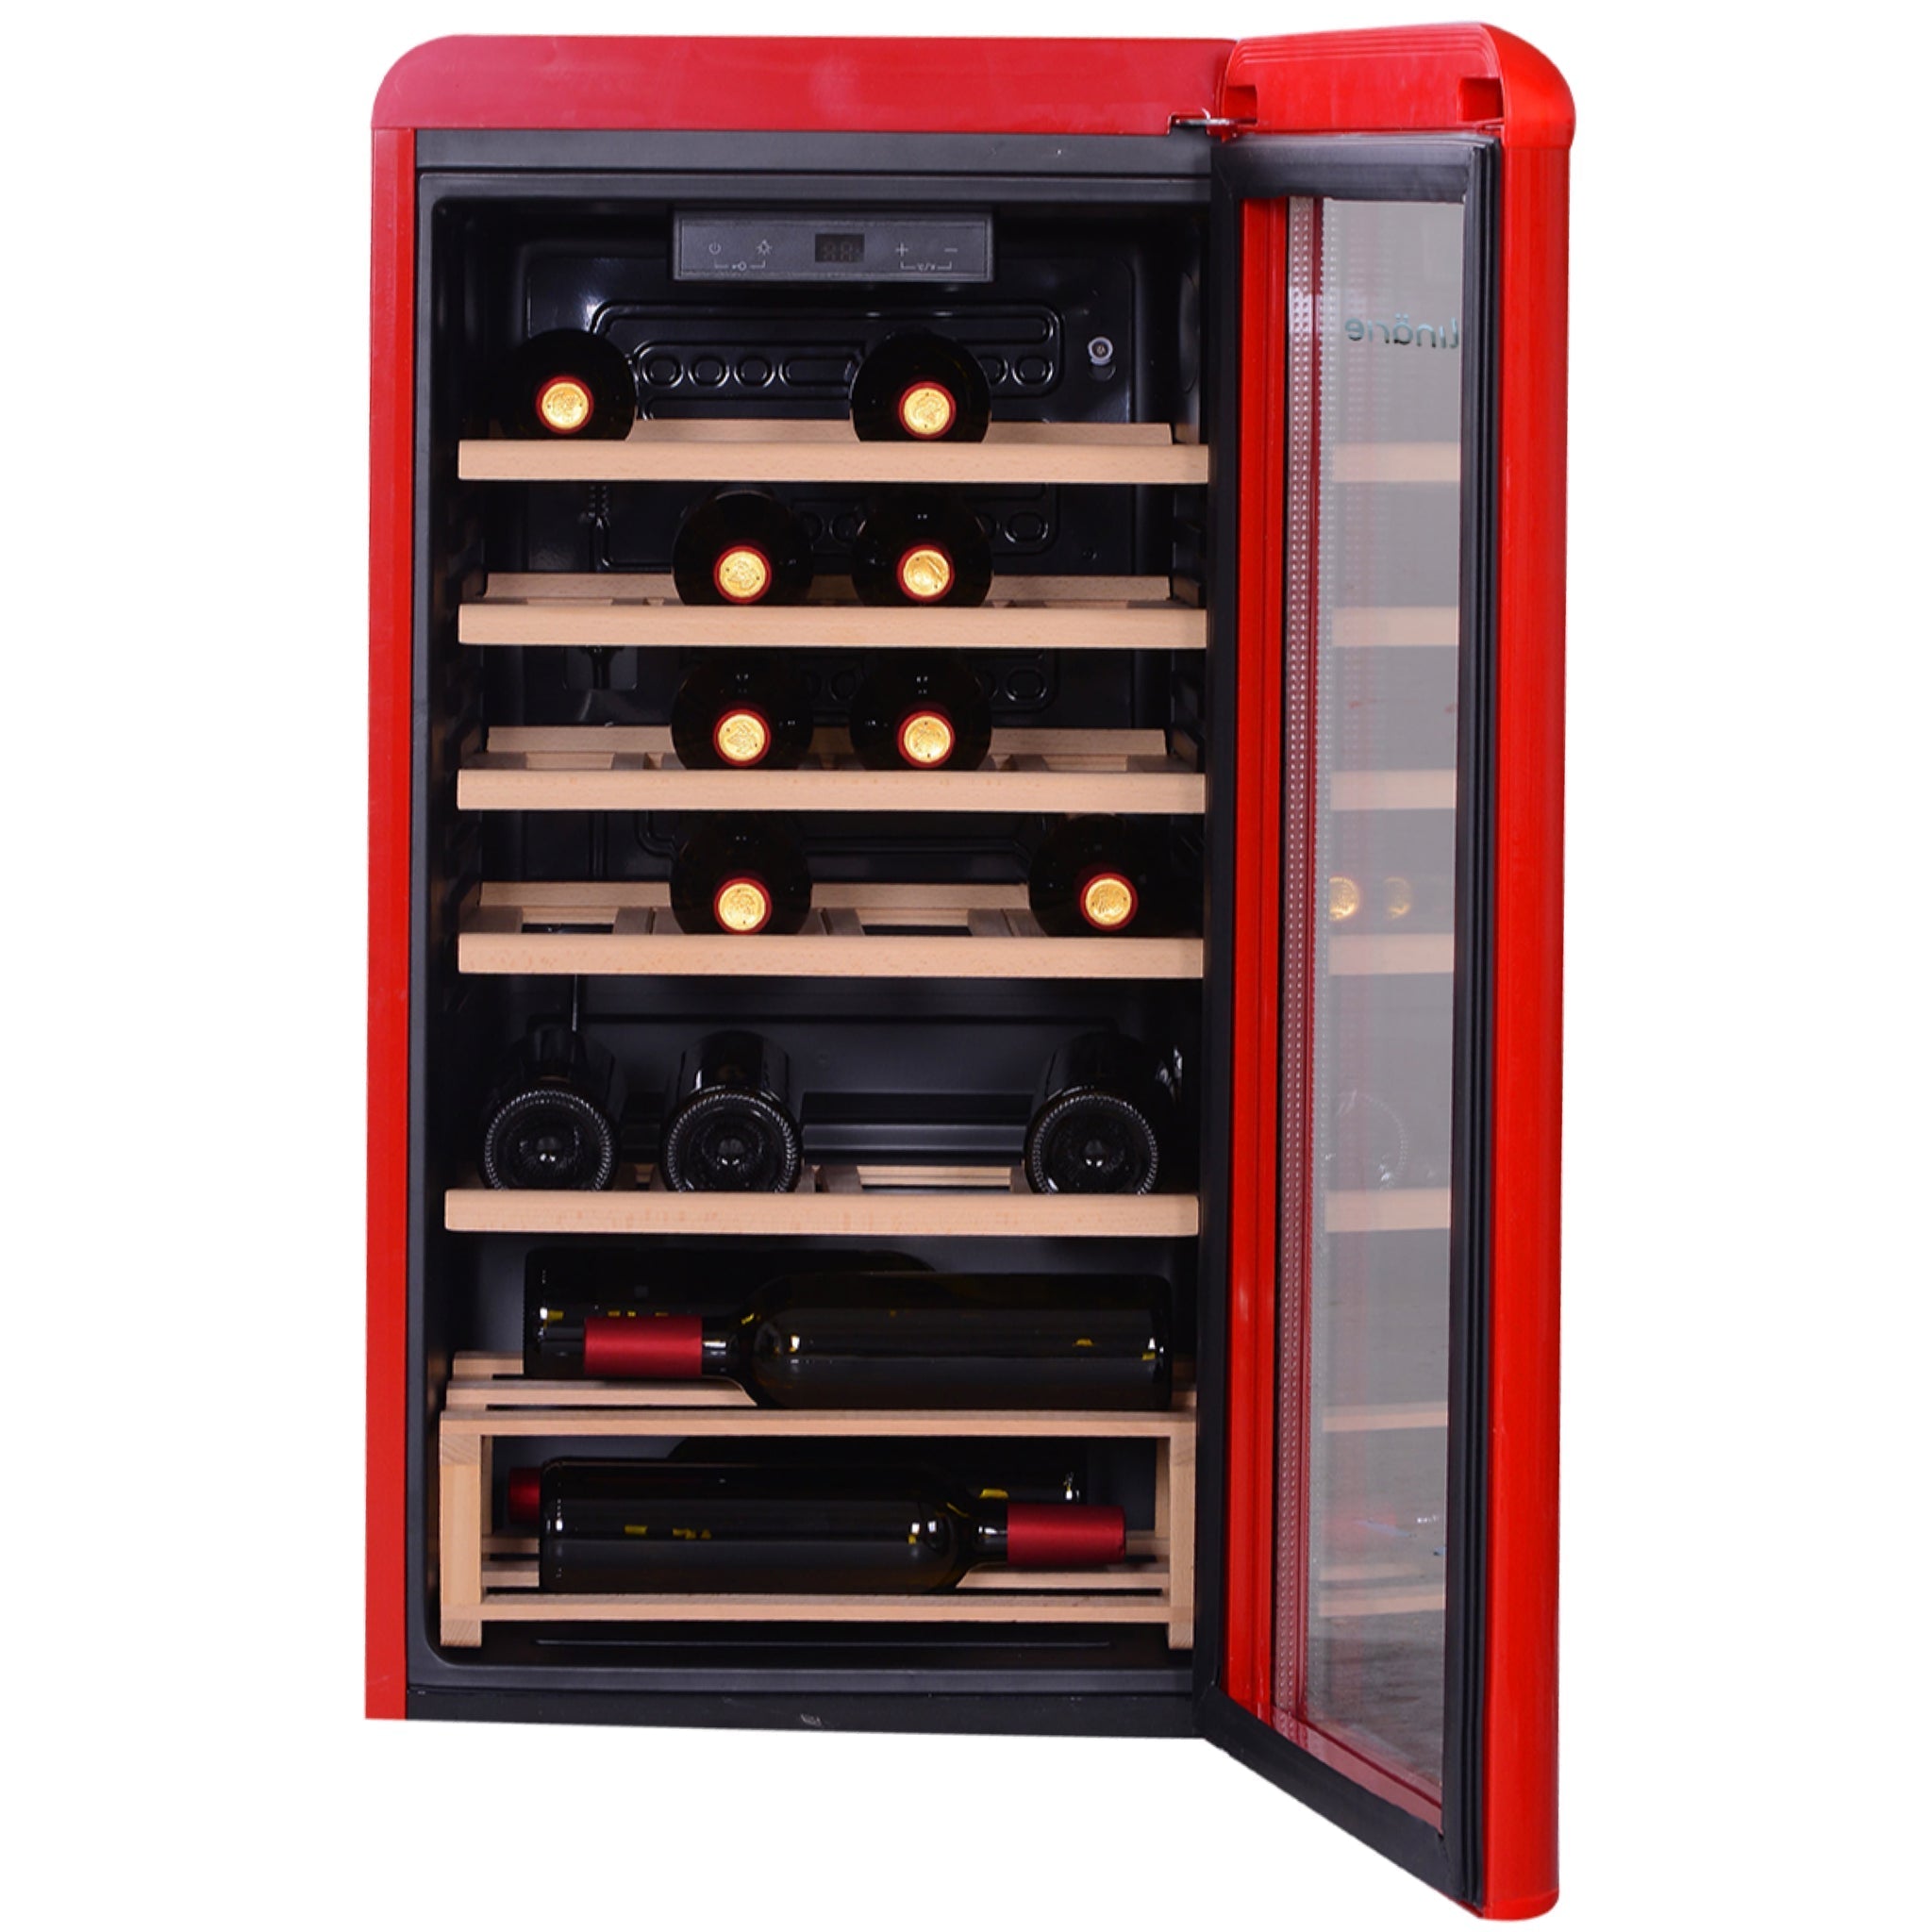 Red retro style wine fridge with glass door and temperature control panel